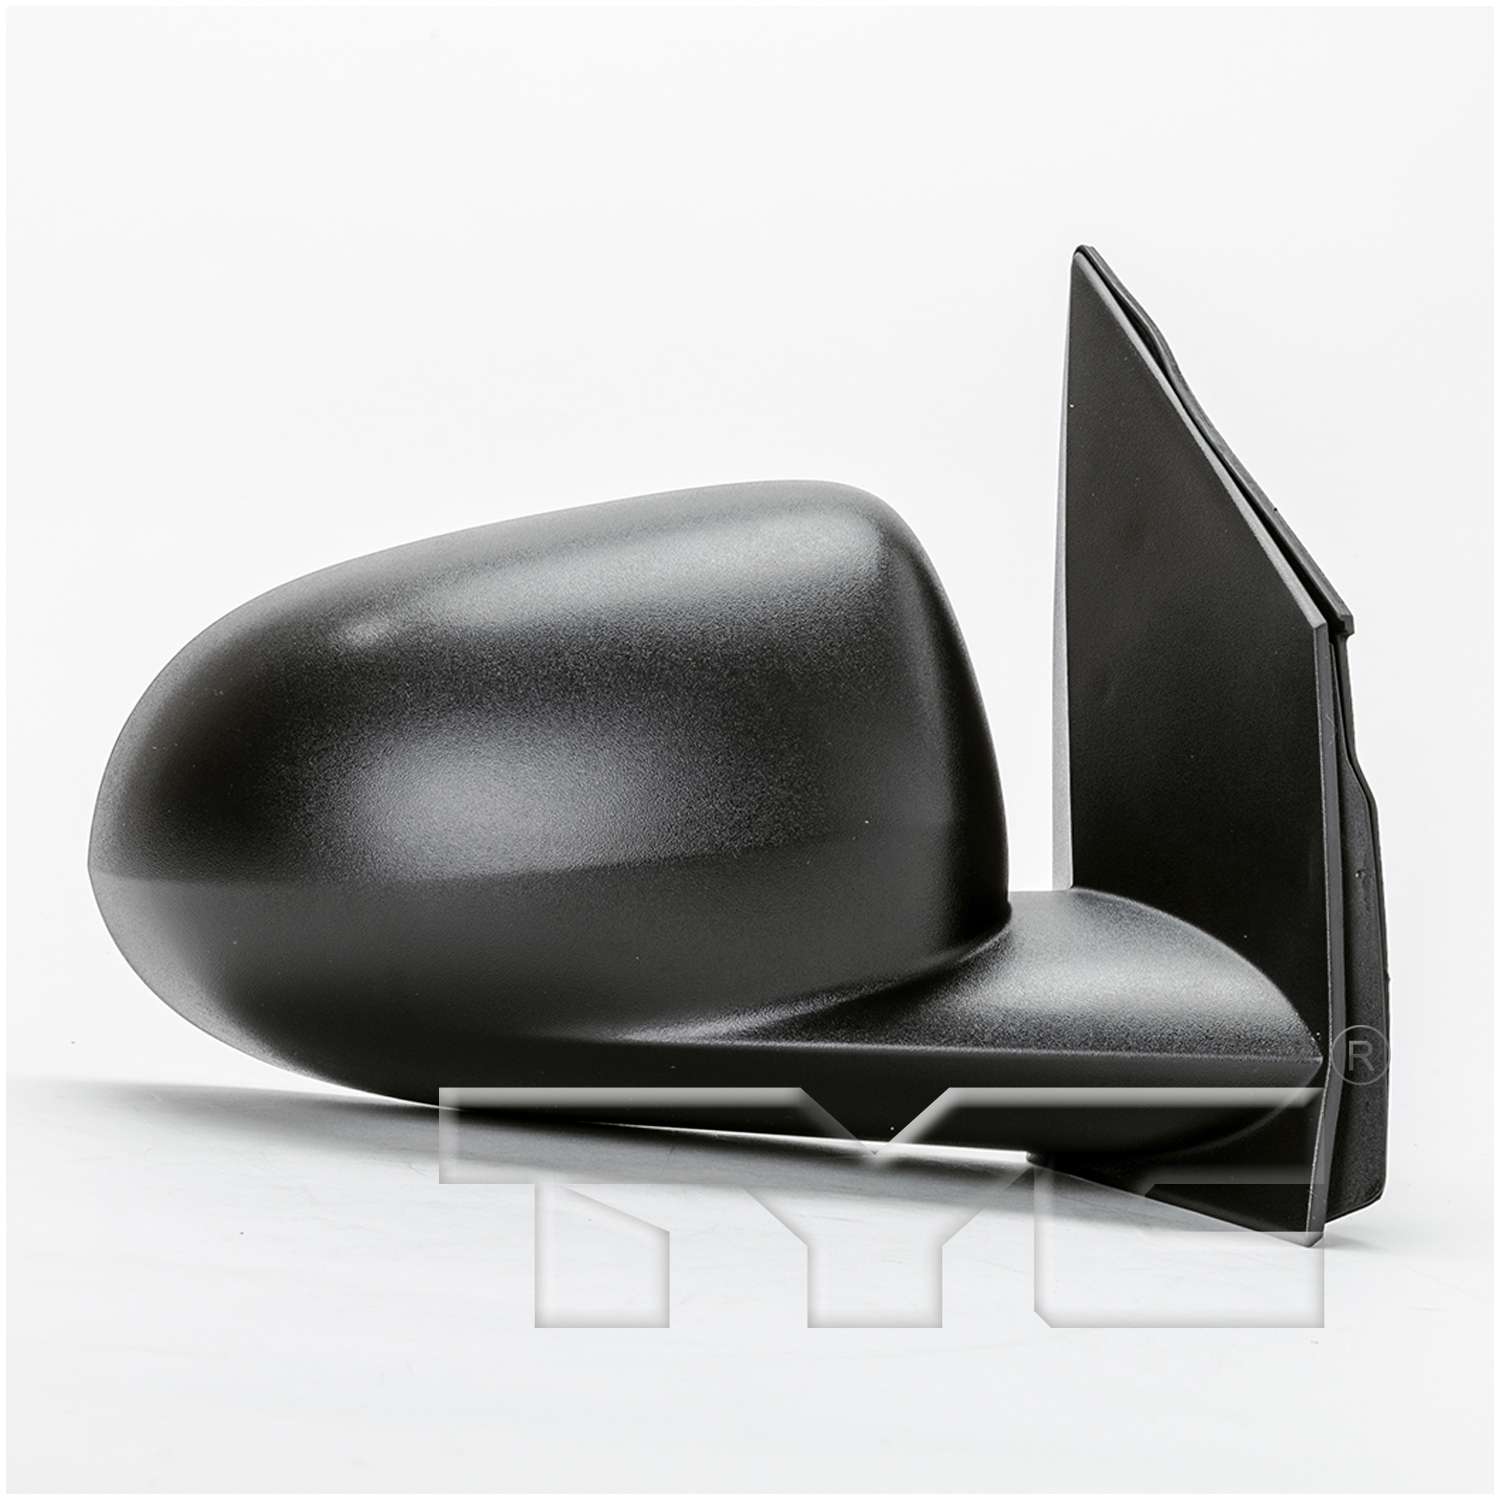 Aftermarket MIRRORS for DODGE - CALIBER, CALIBER,07-12,RT Mirror outside rear view